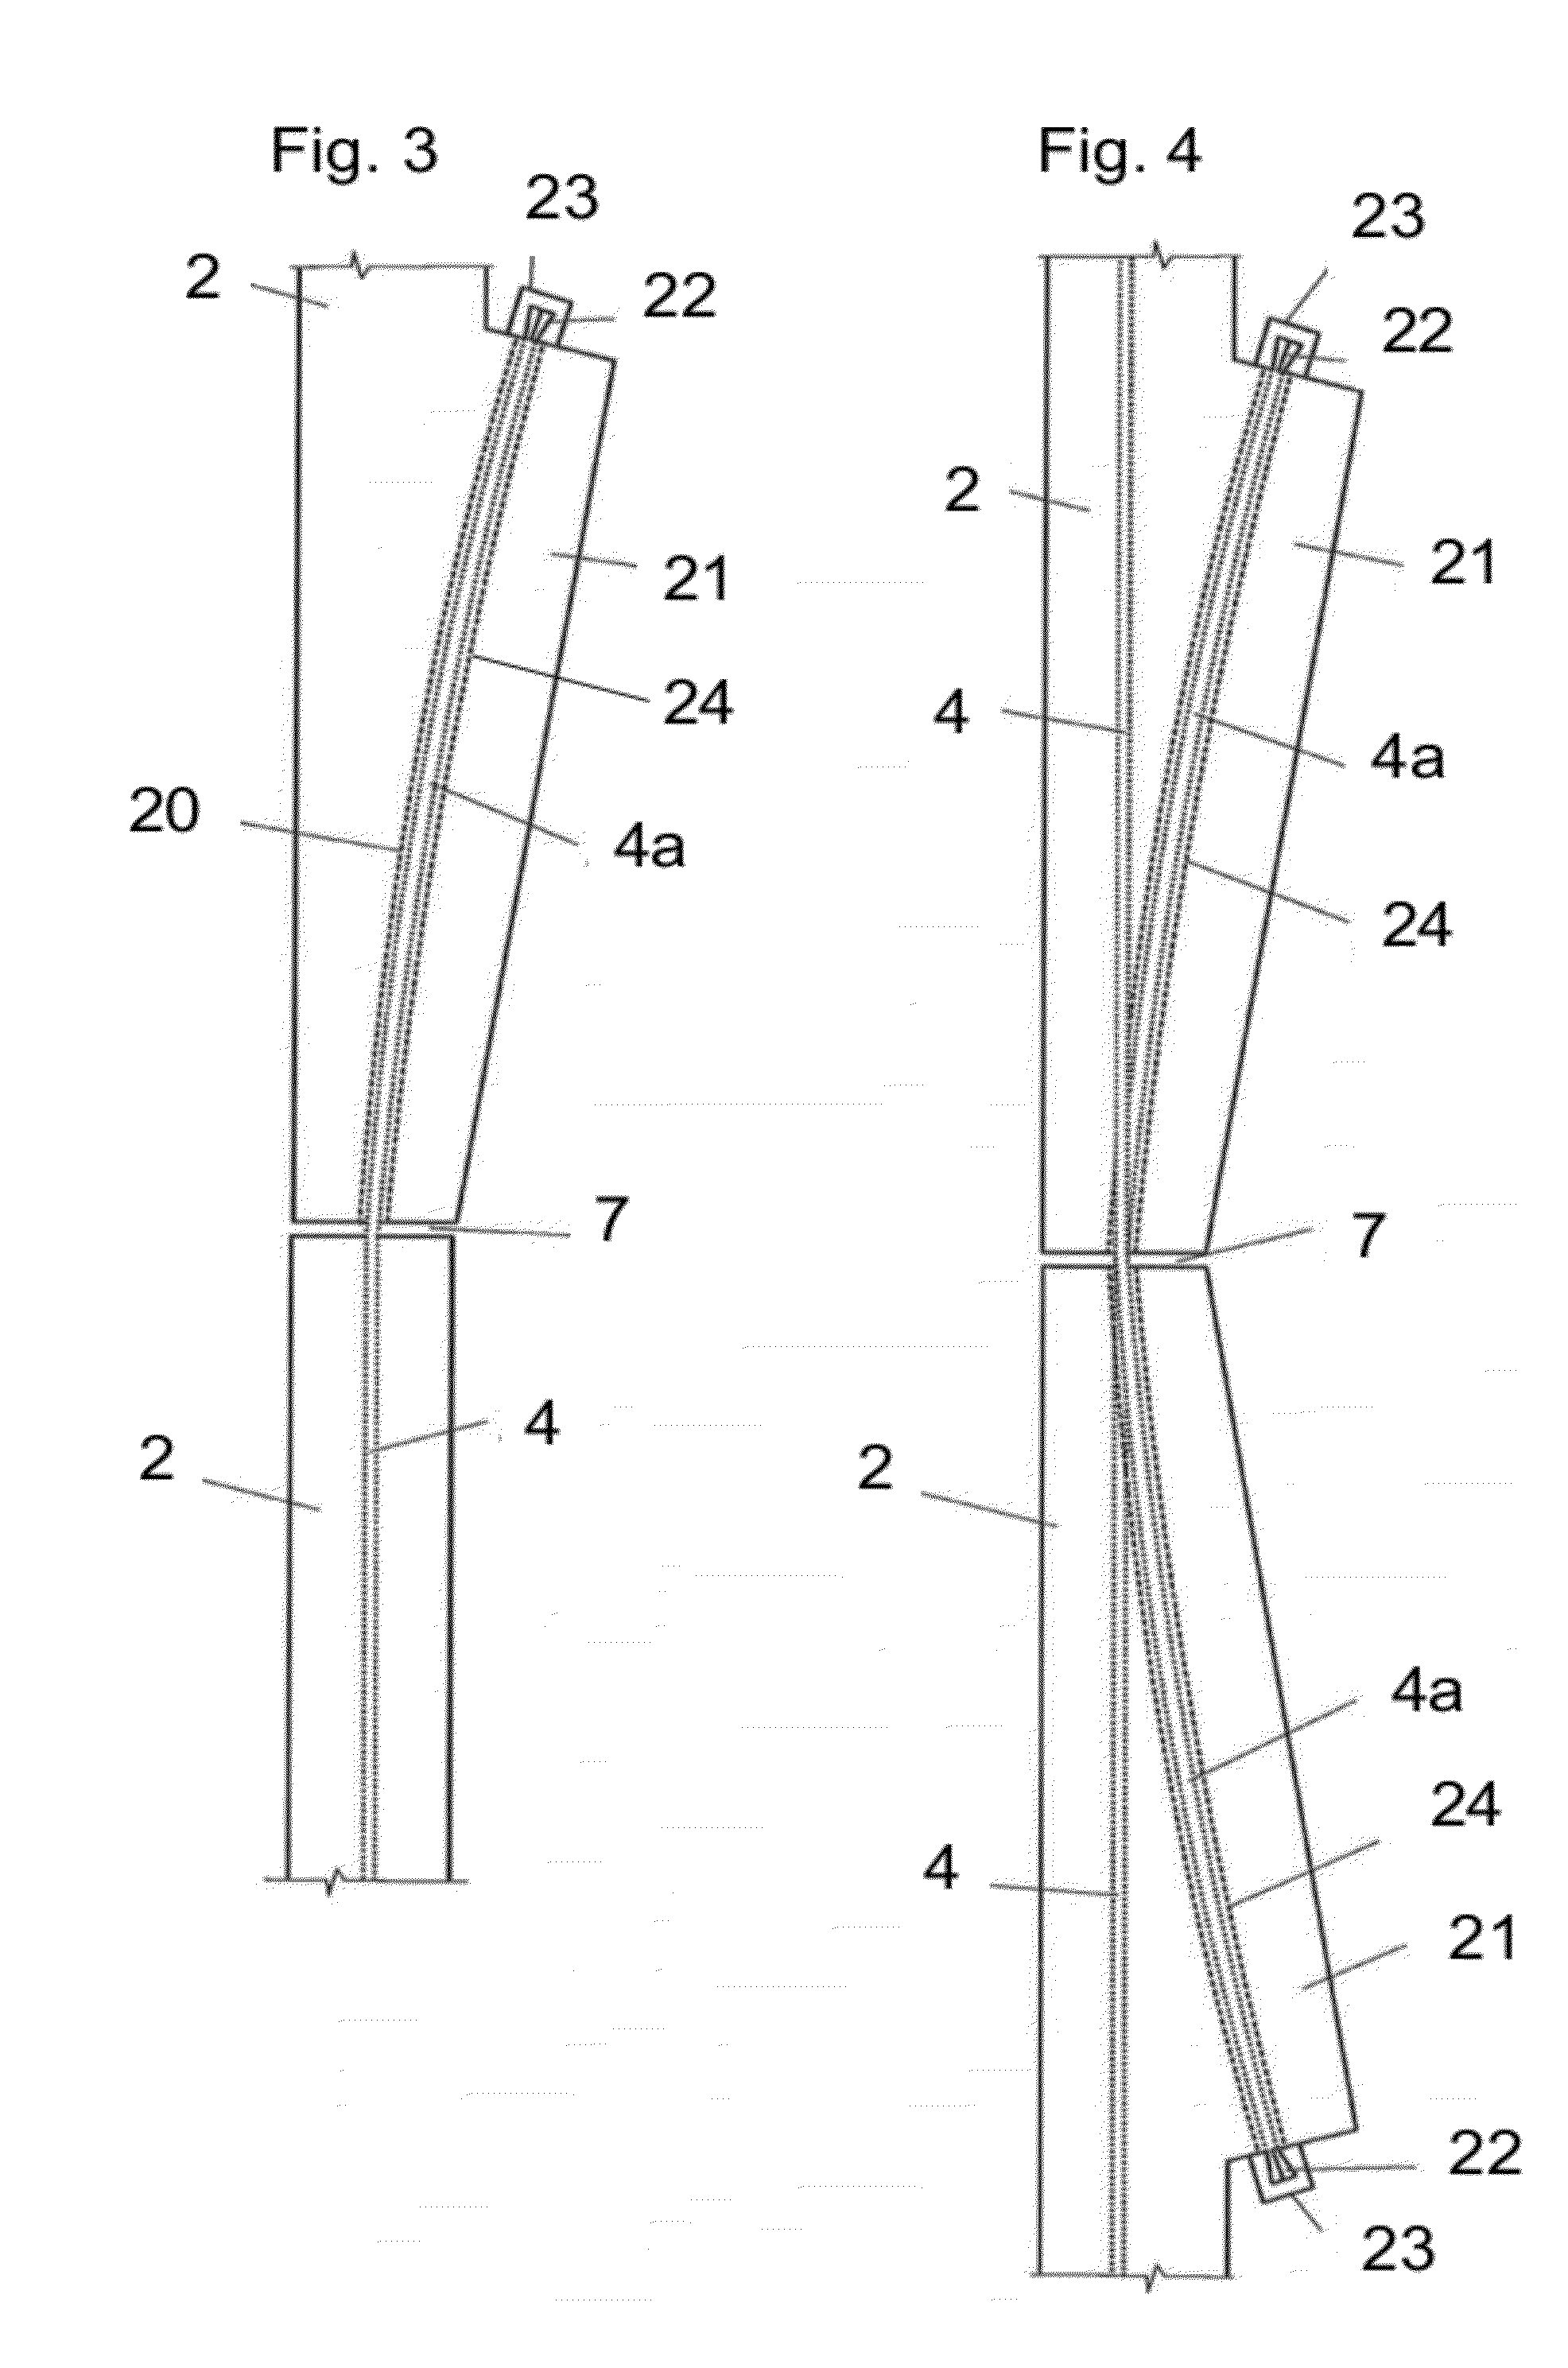 Support structure for a wind turbine and procedure to erect the support structure